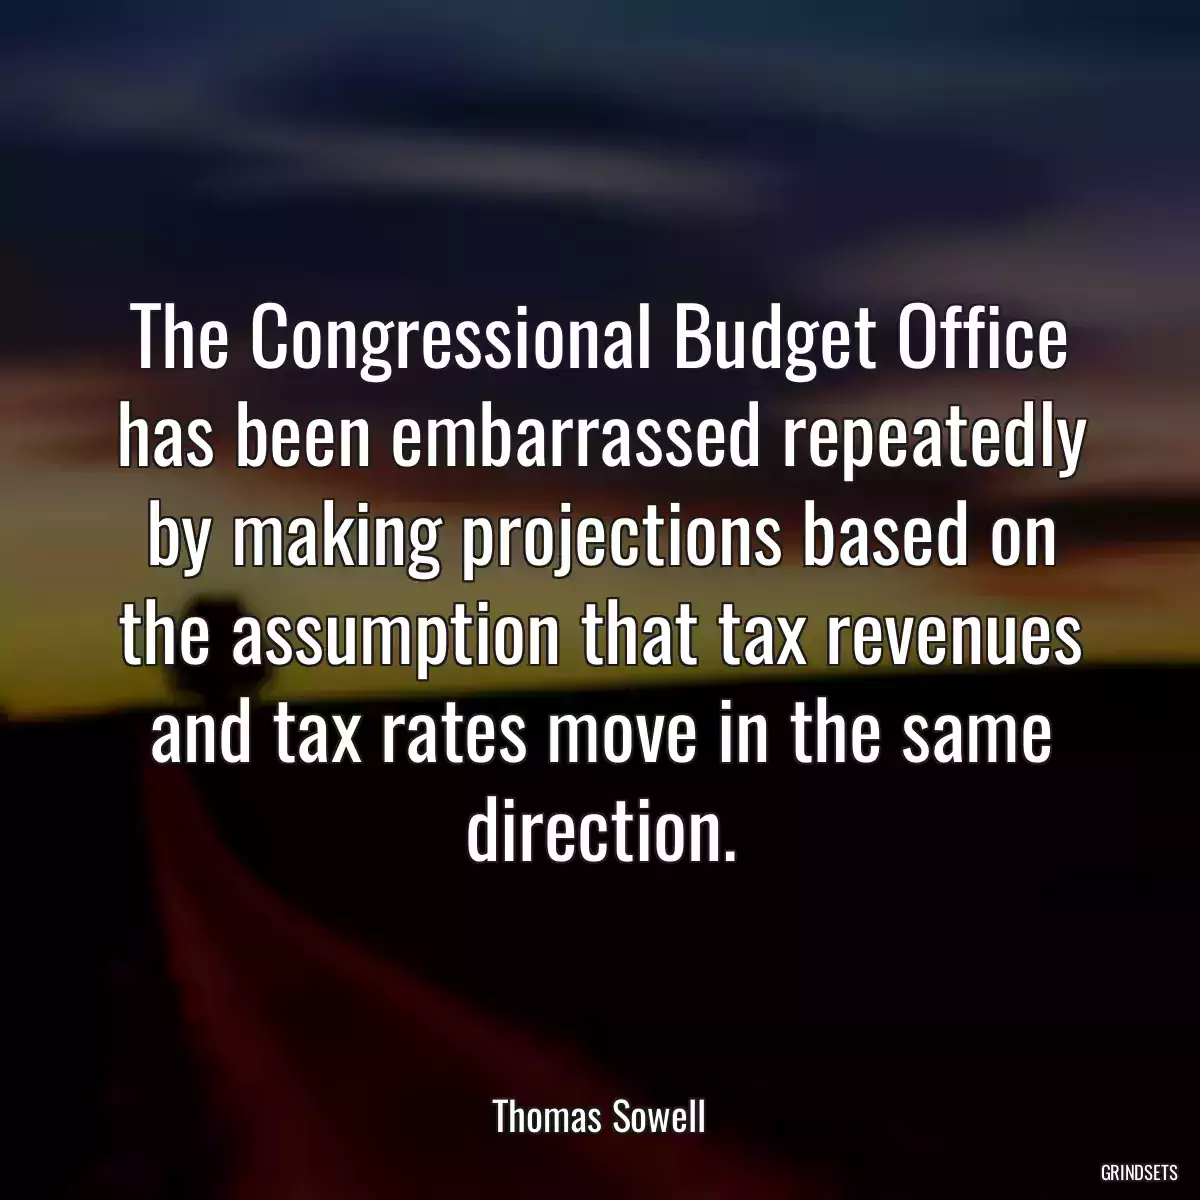 The Congressional Budget Office has been embarrassed repeatedly by making projections based on the assumption that tax revenues and tax rates move in the same direction.